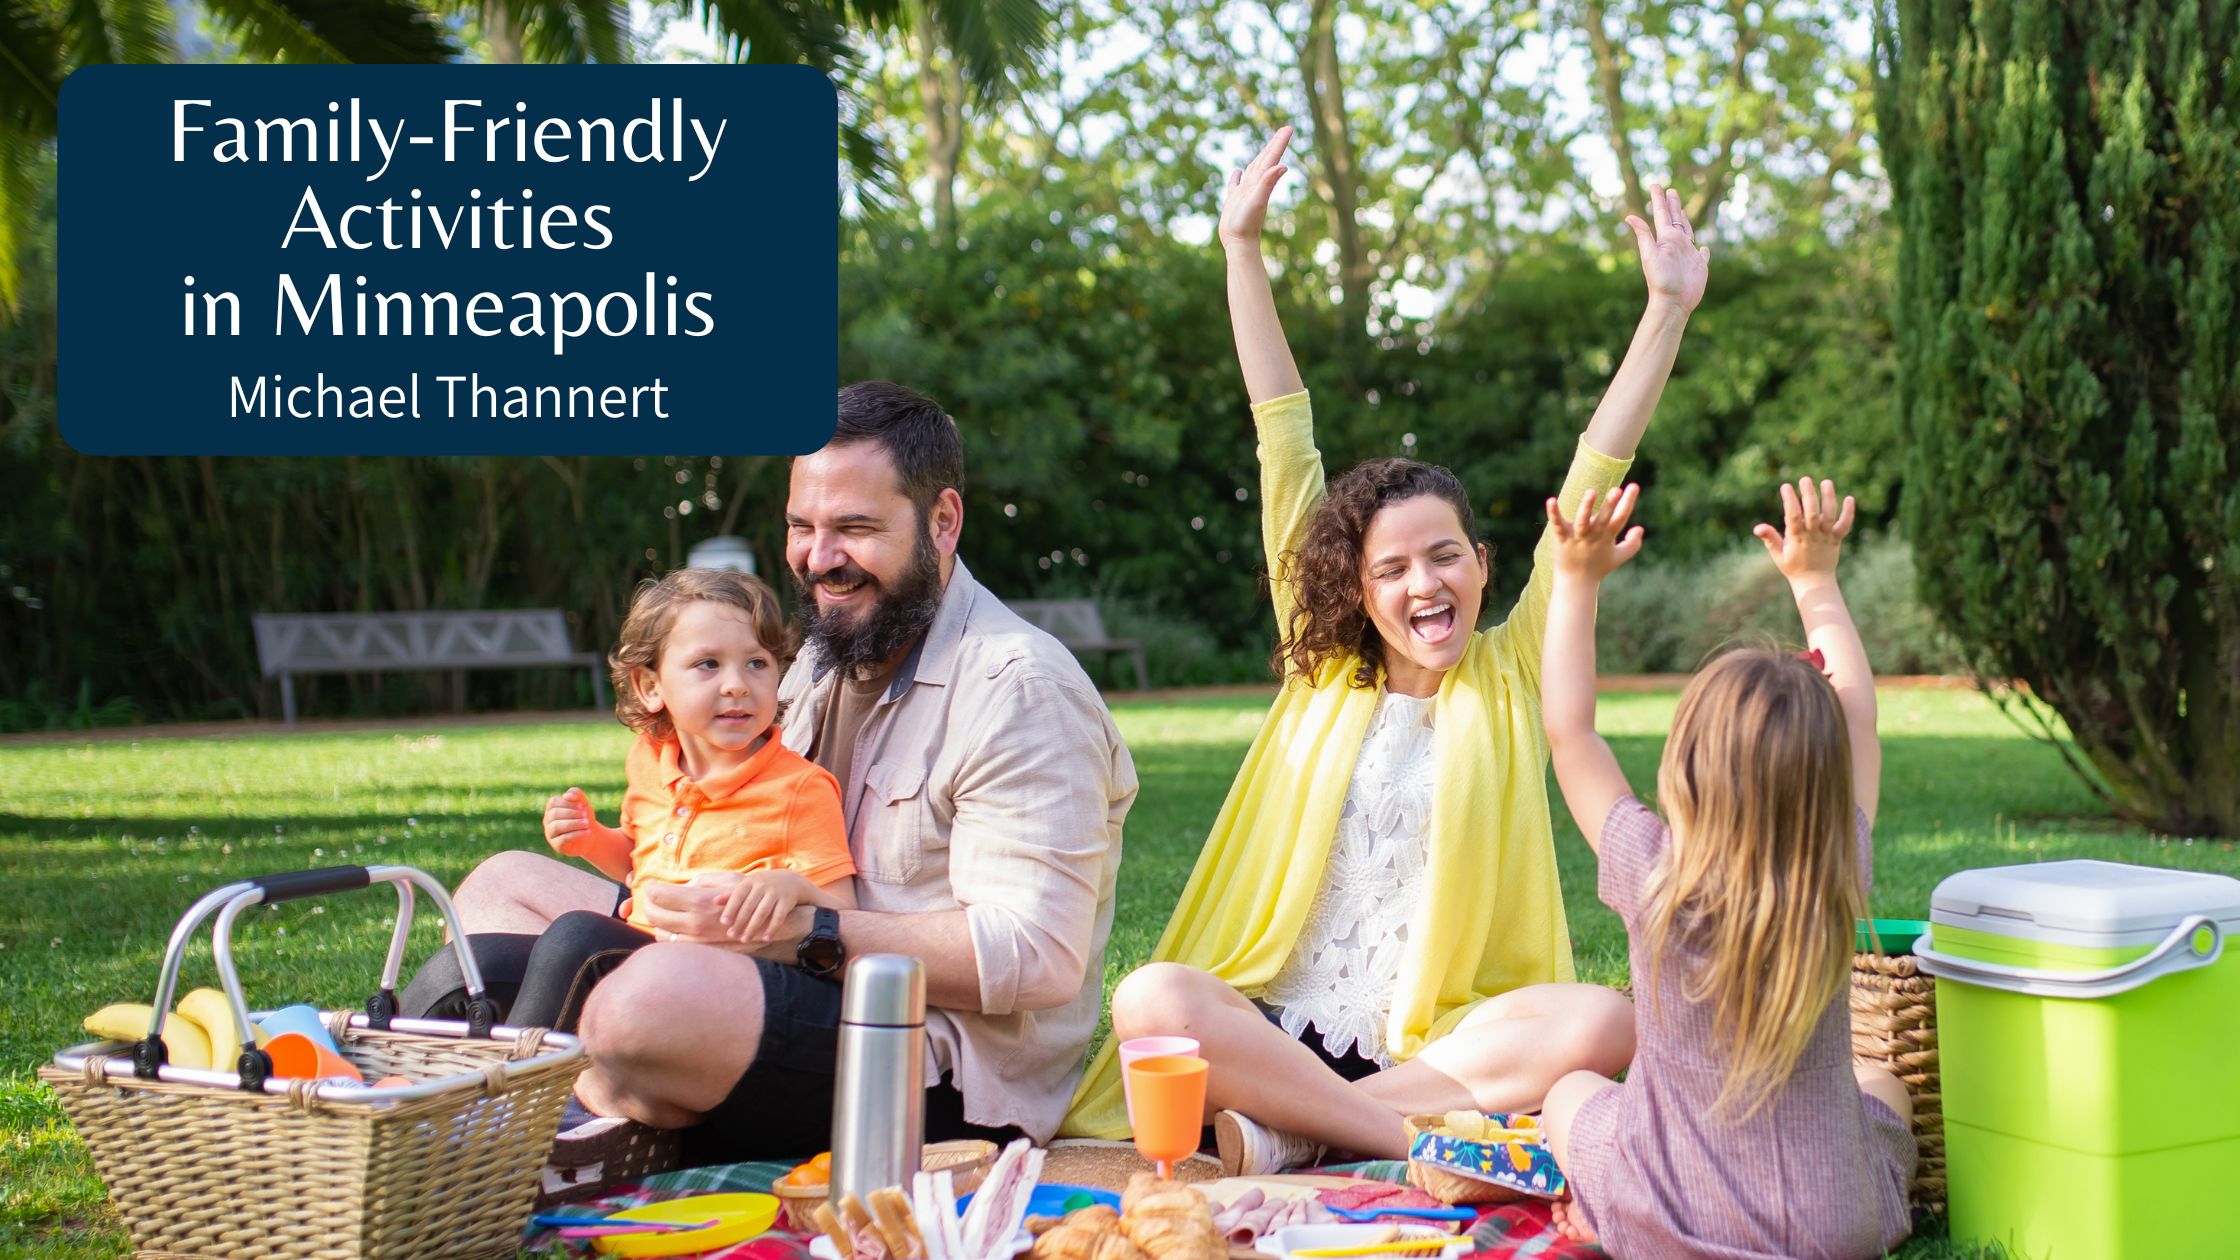 Family-Friendly Activities in Minneapolis